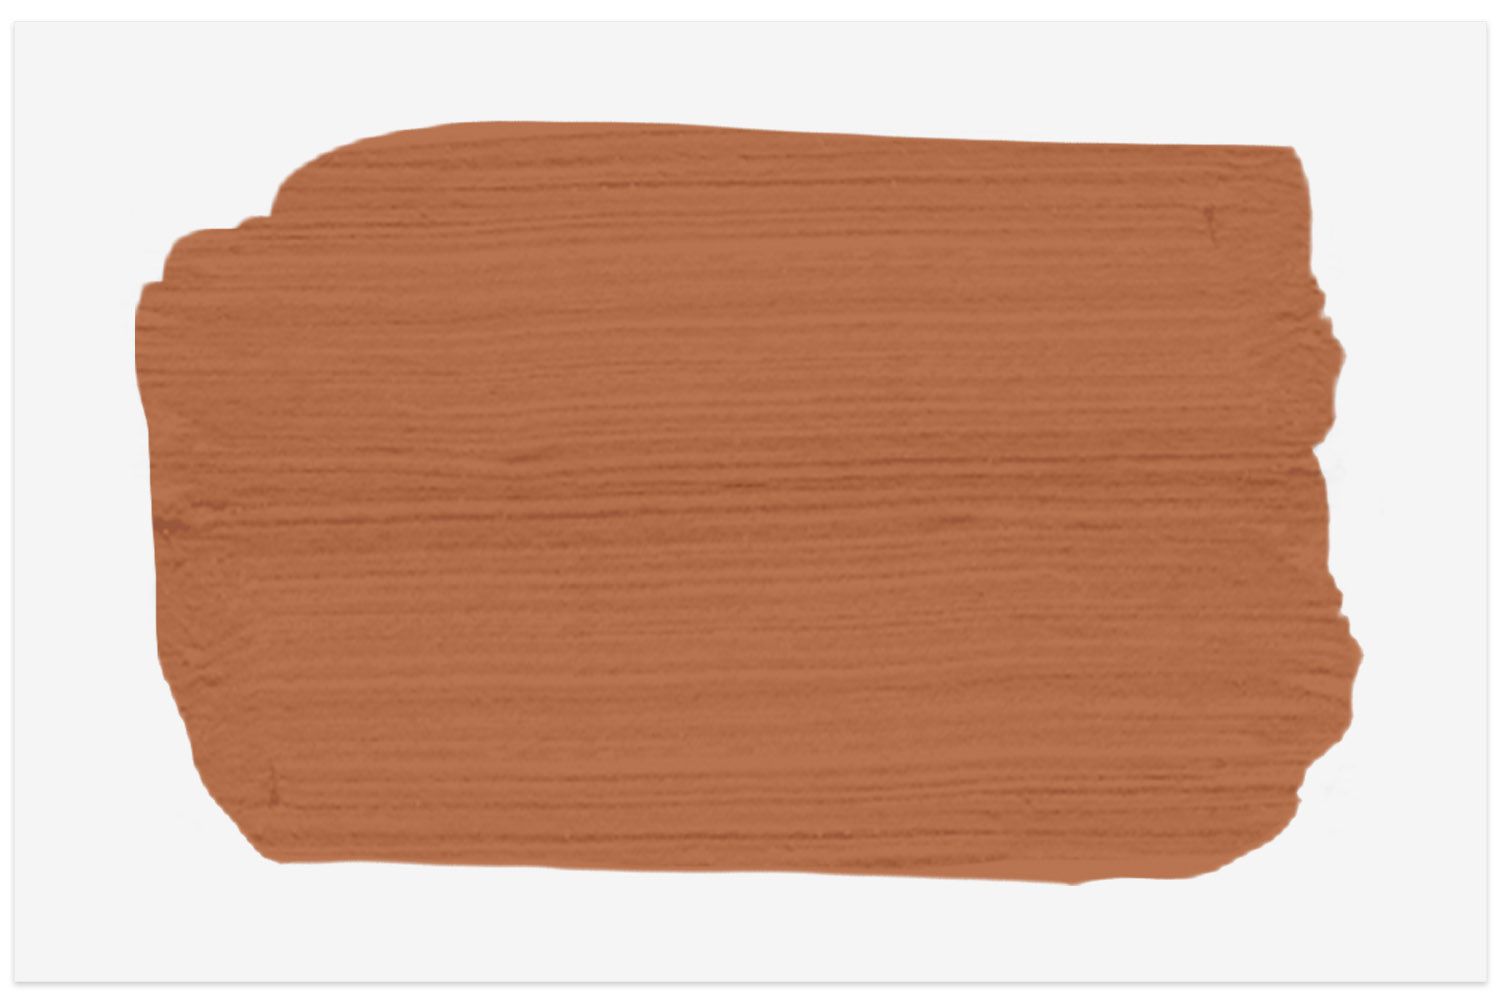 Benjamin Moore Firenze paint swatch for rustic Tuscan